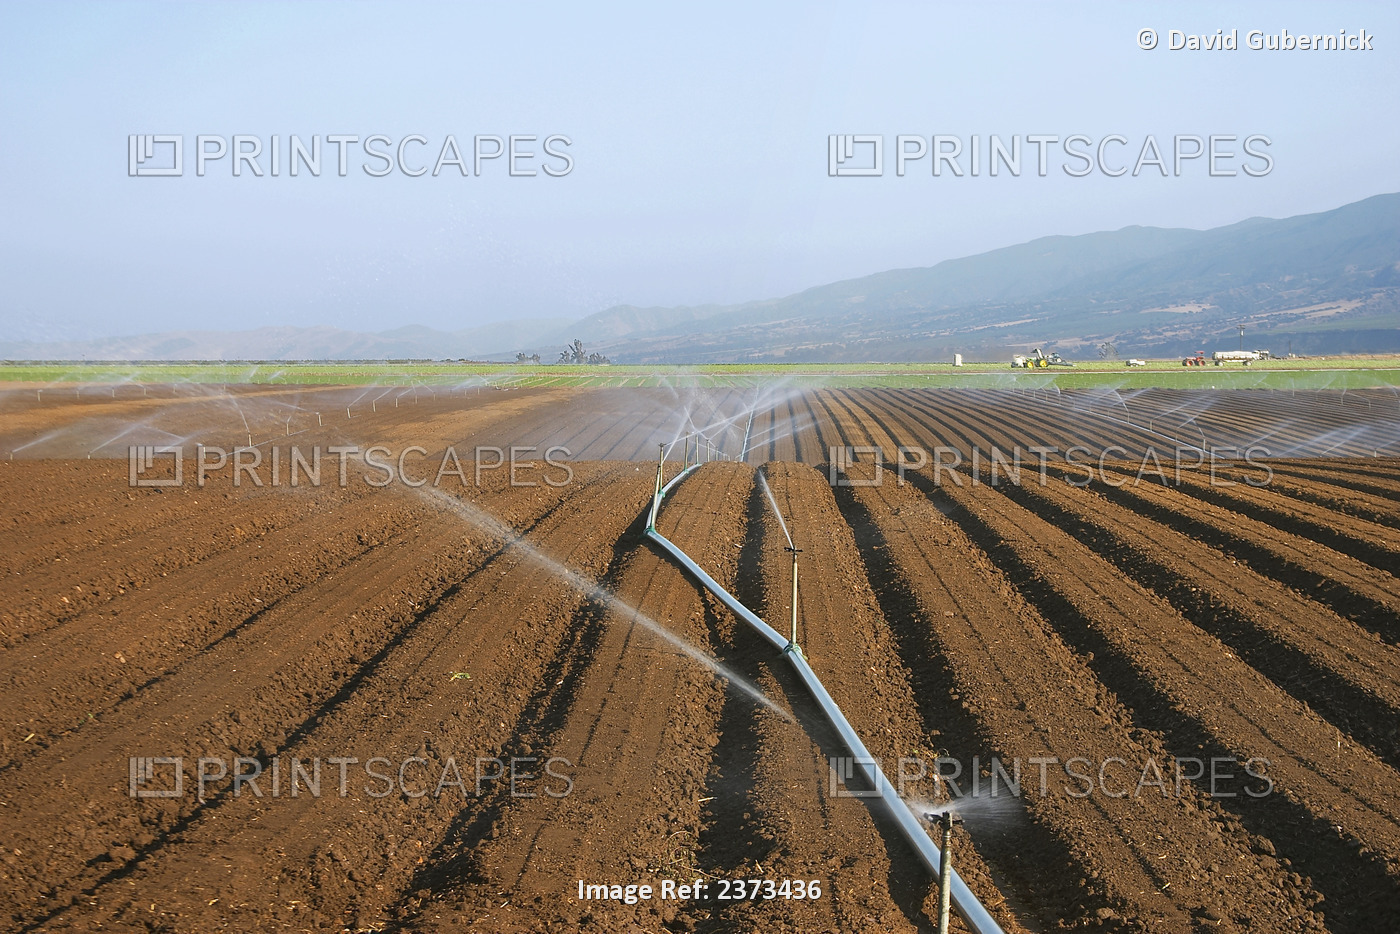 Agriculture - Sprinkler irrigation of a newly planted lettuce field / Salinas ...